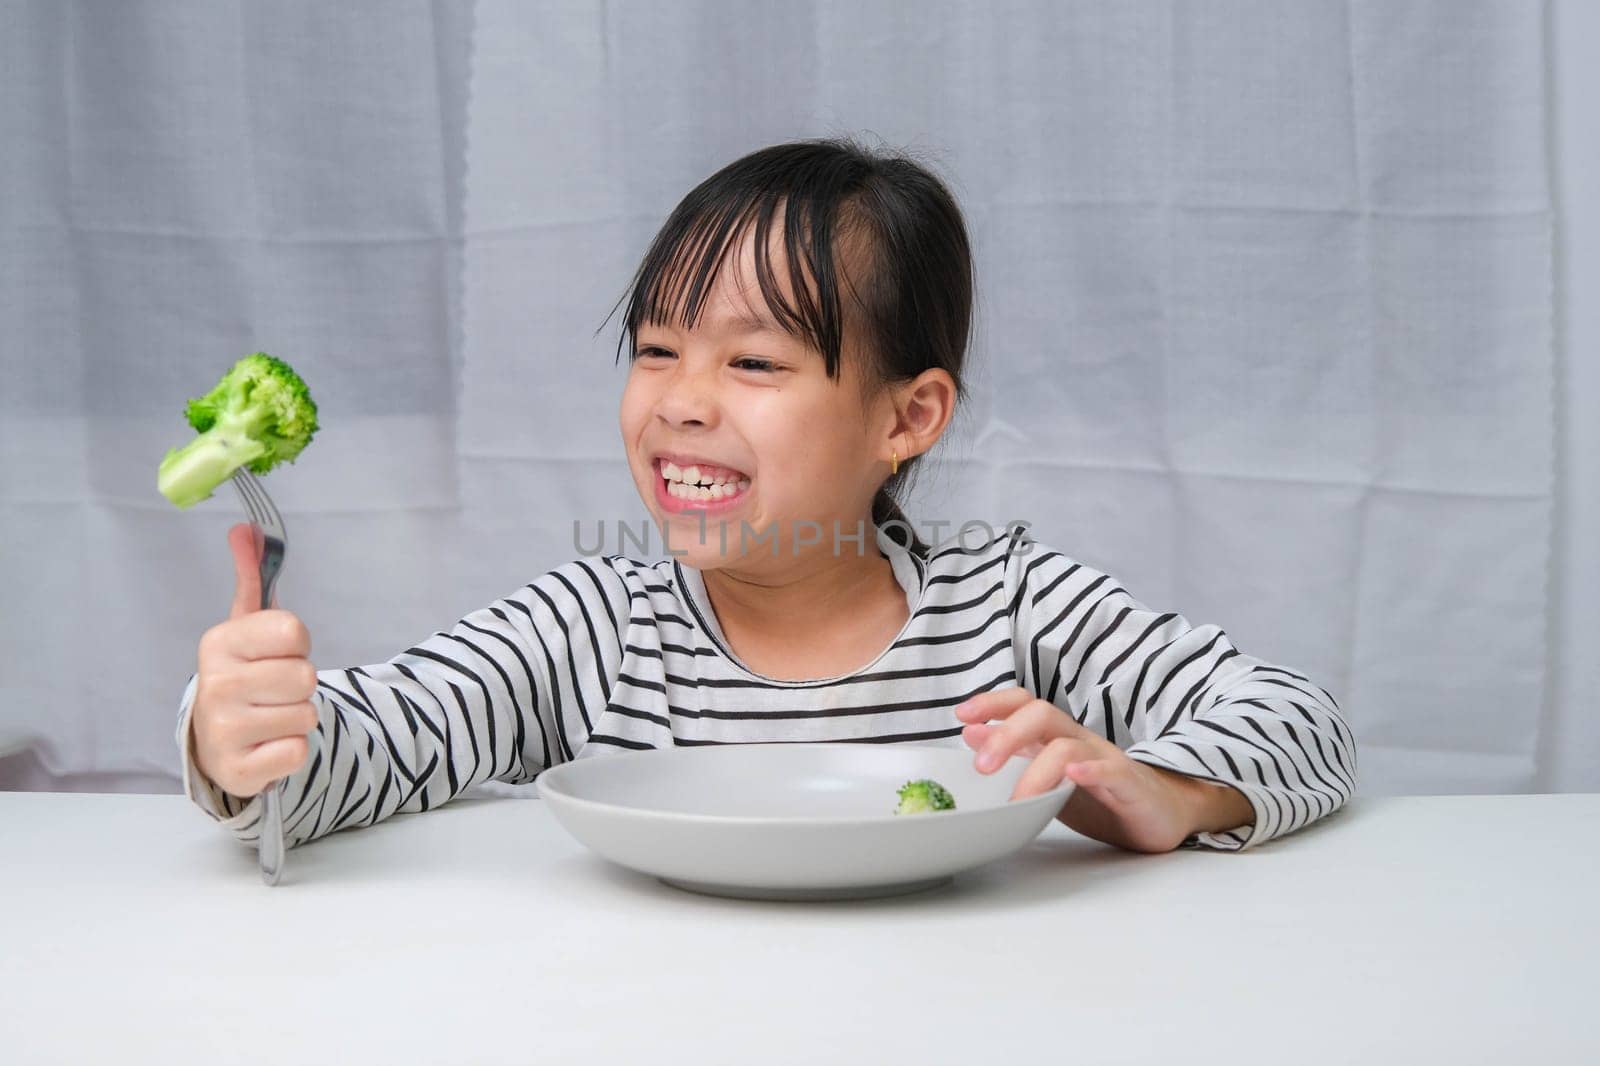 Children love to eat vegetables. Cute Asian girl eating healthy vegetables in her meal. Nutrition and healthy eating habits for children. by TEERASAK